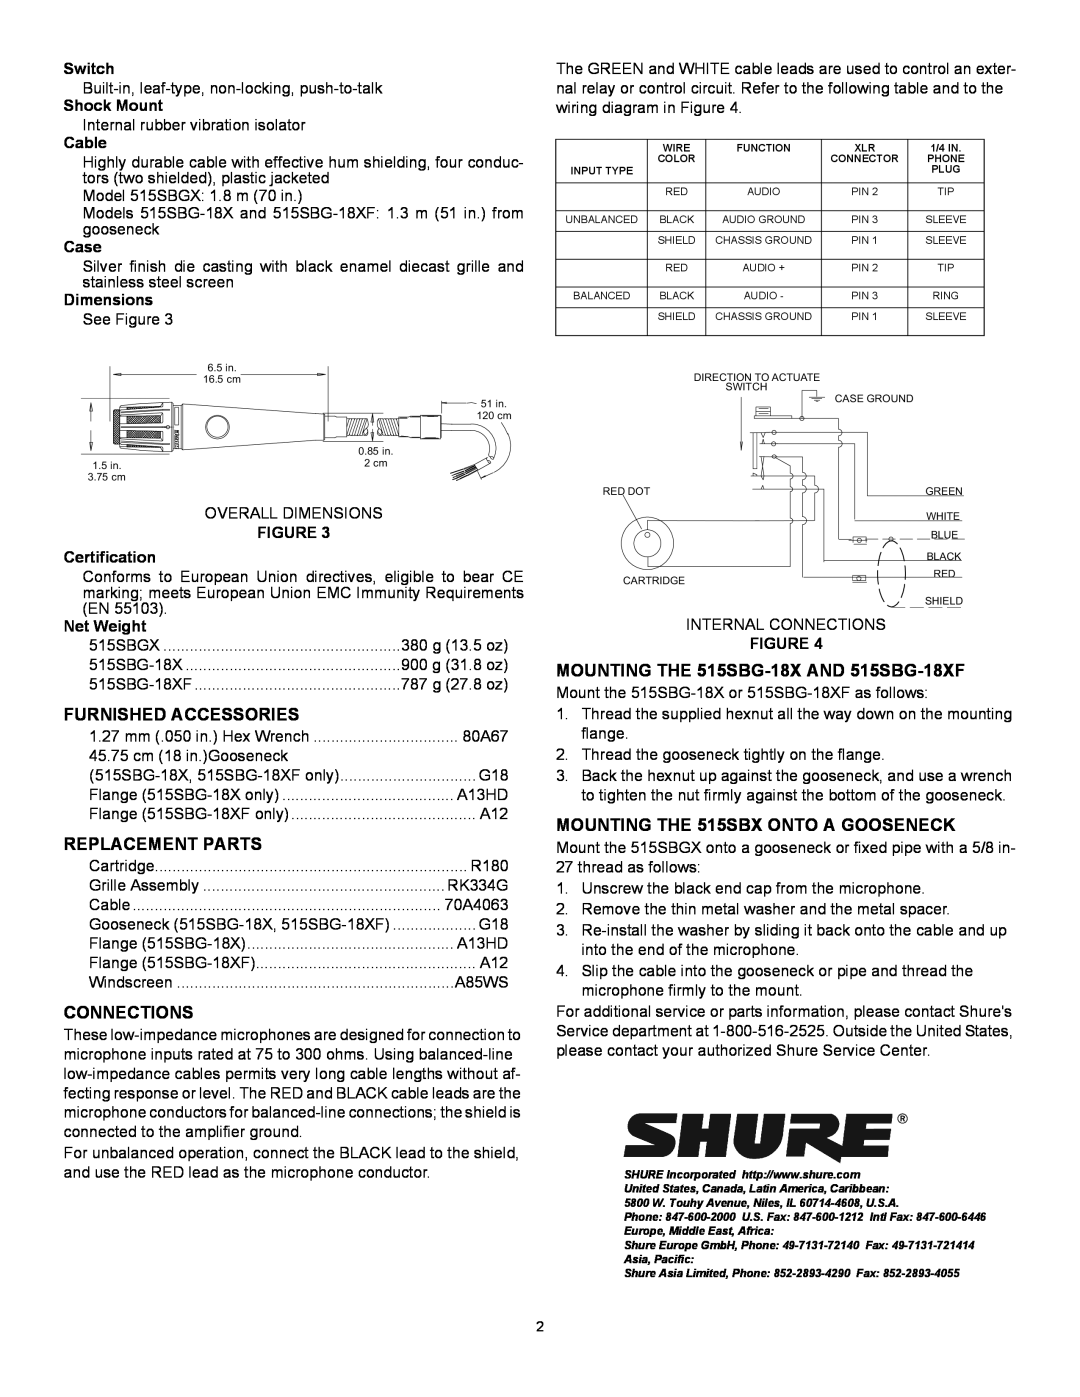 Shure 515SBGX Furnished Accessories, Replacement Parts, Connections, MOUNTING THE 515SBG-18XAND 515SBG-18XF, Switch, Cable 